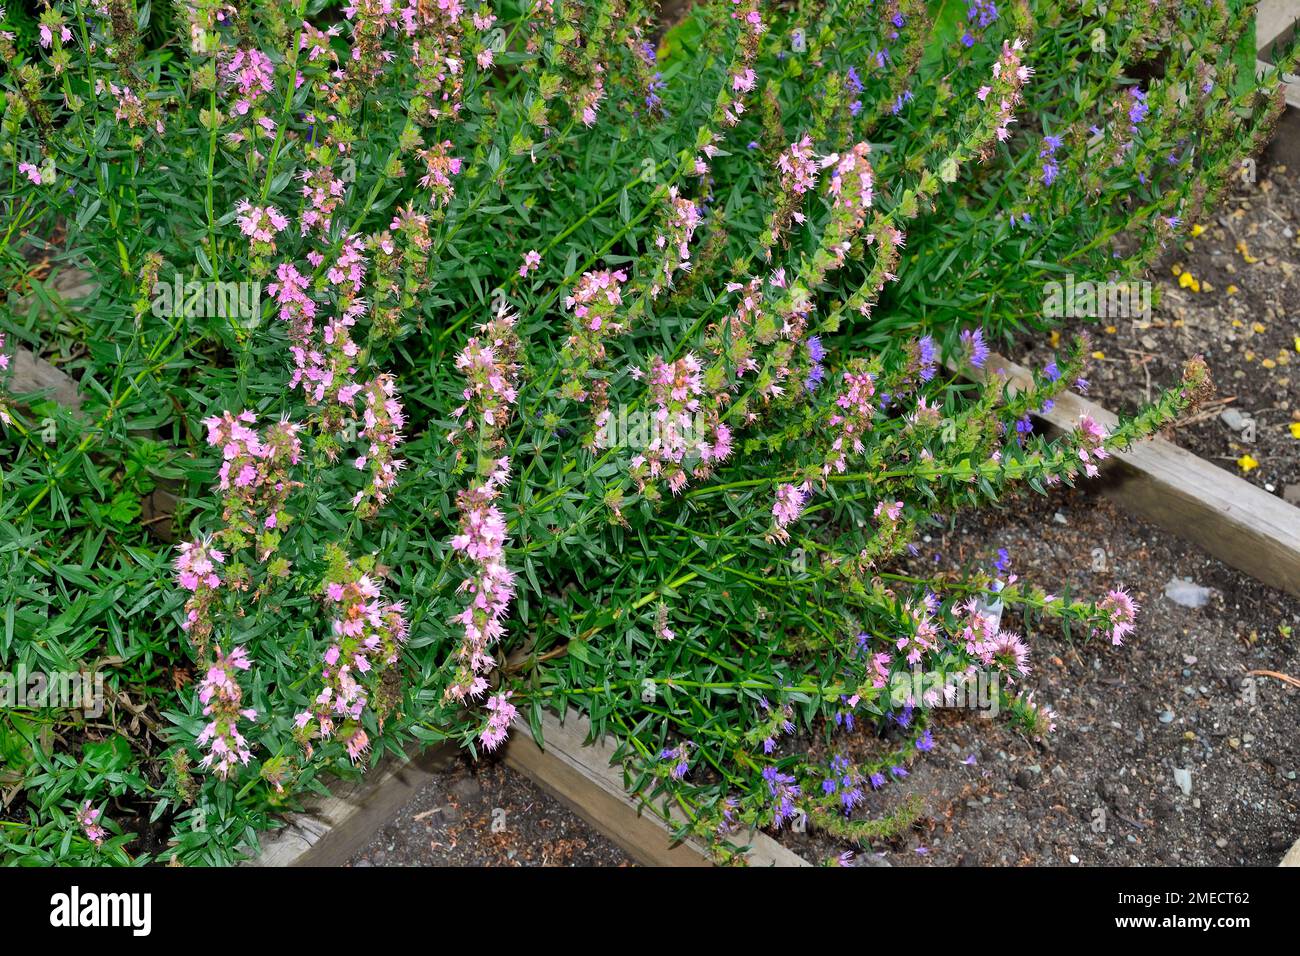 Blue and pink flowers of hyssop or hyssopus officinalis - beautiful hardy plant in summer garden. Hyssop is medicinal herb, aromatic condiment, good h Stock Photo